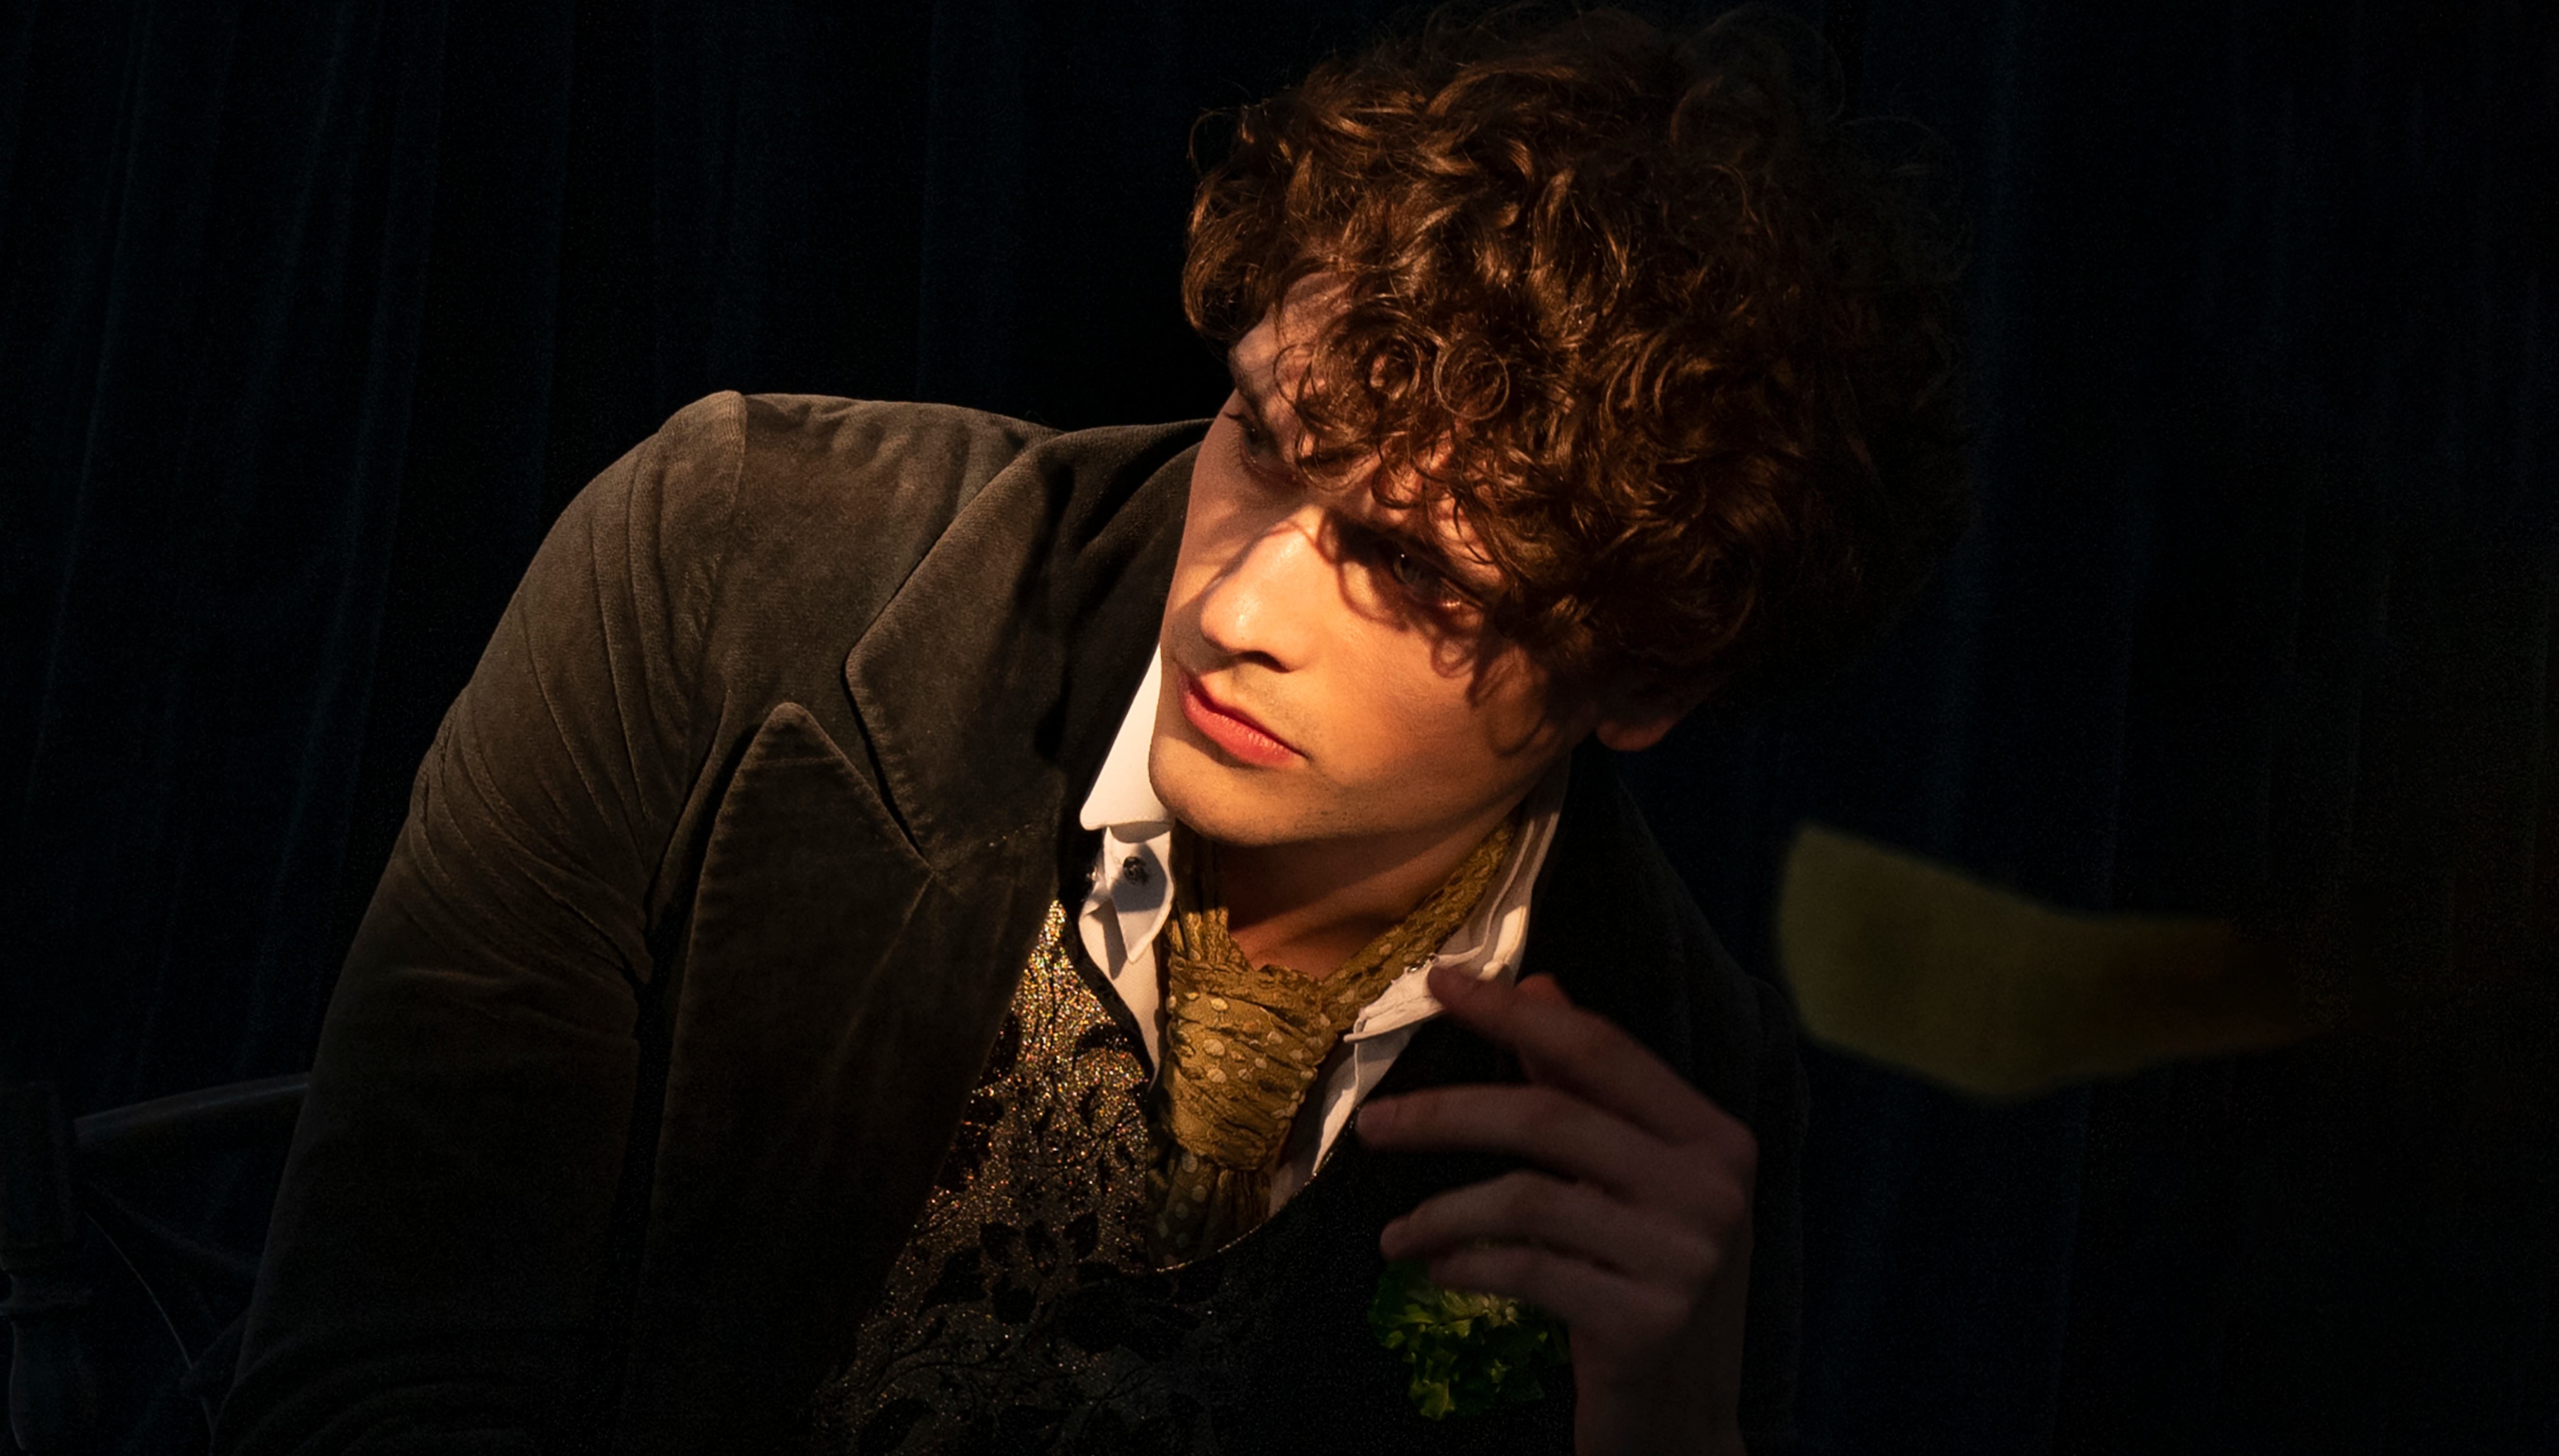 A man with light brown curly hair looks off into the distance in front of a black background. He wears a gold tie, white shirt and green jacket.